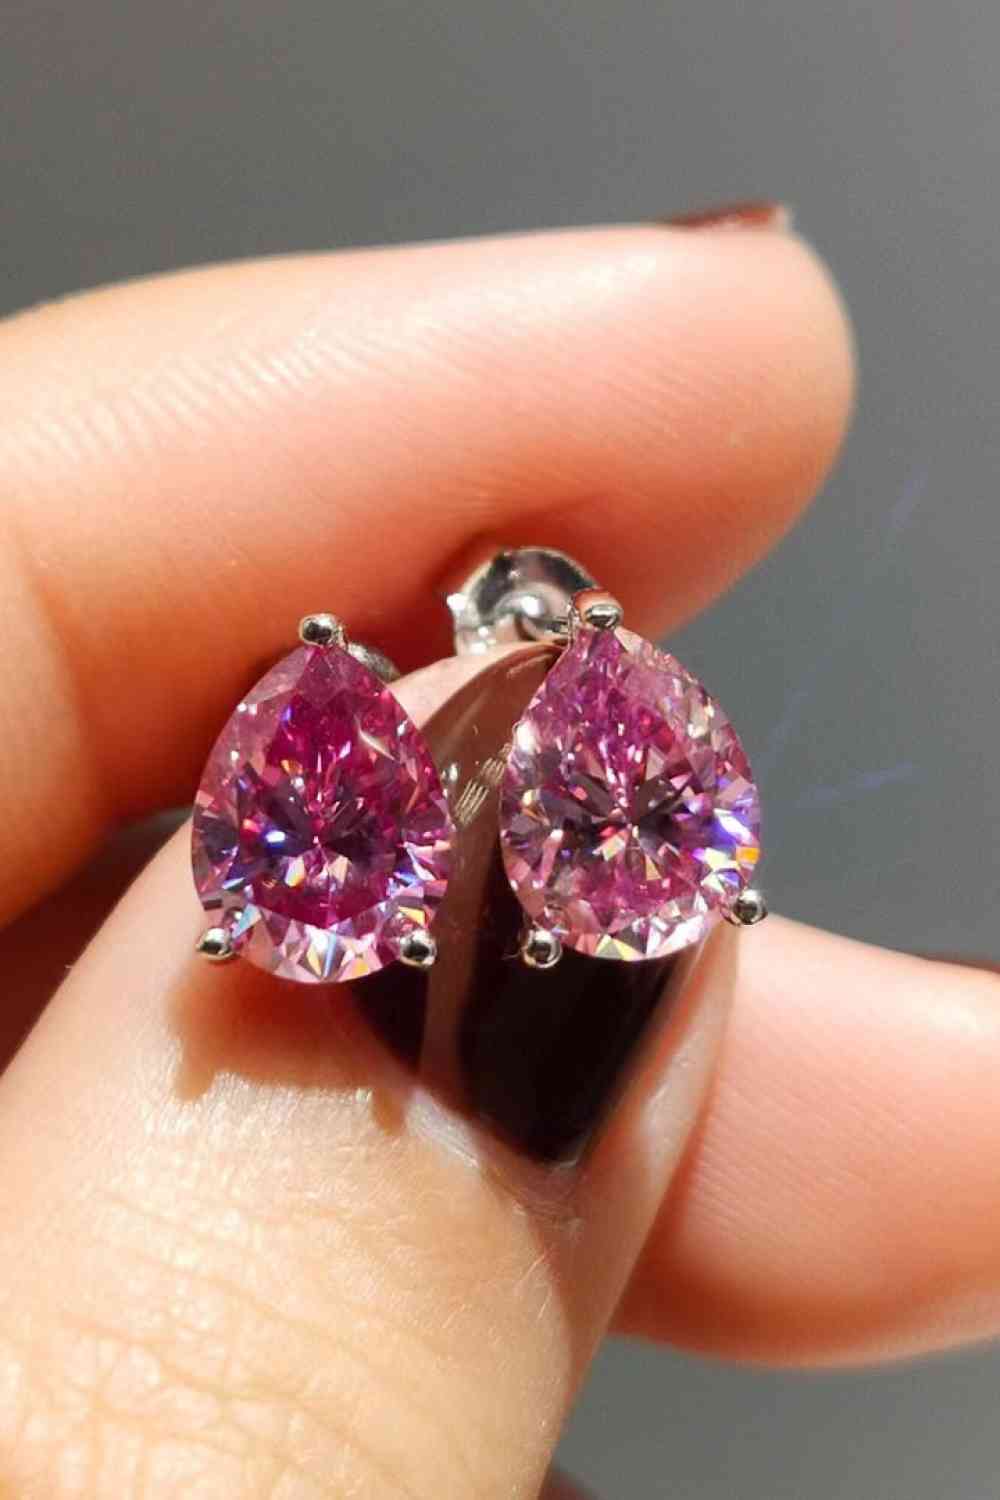 a pair of pink diamond earrings on someone's finger